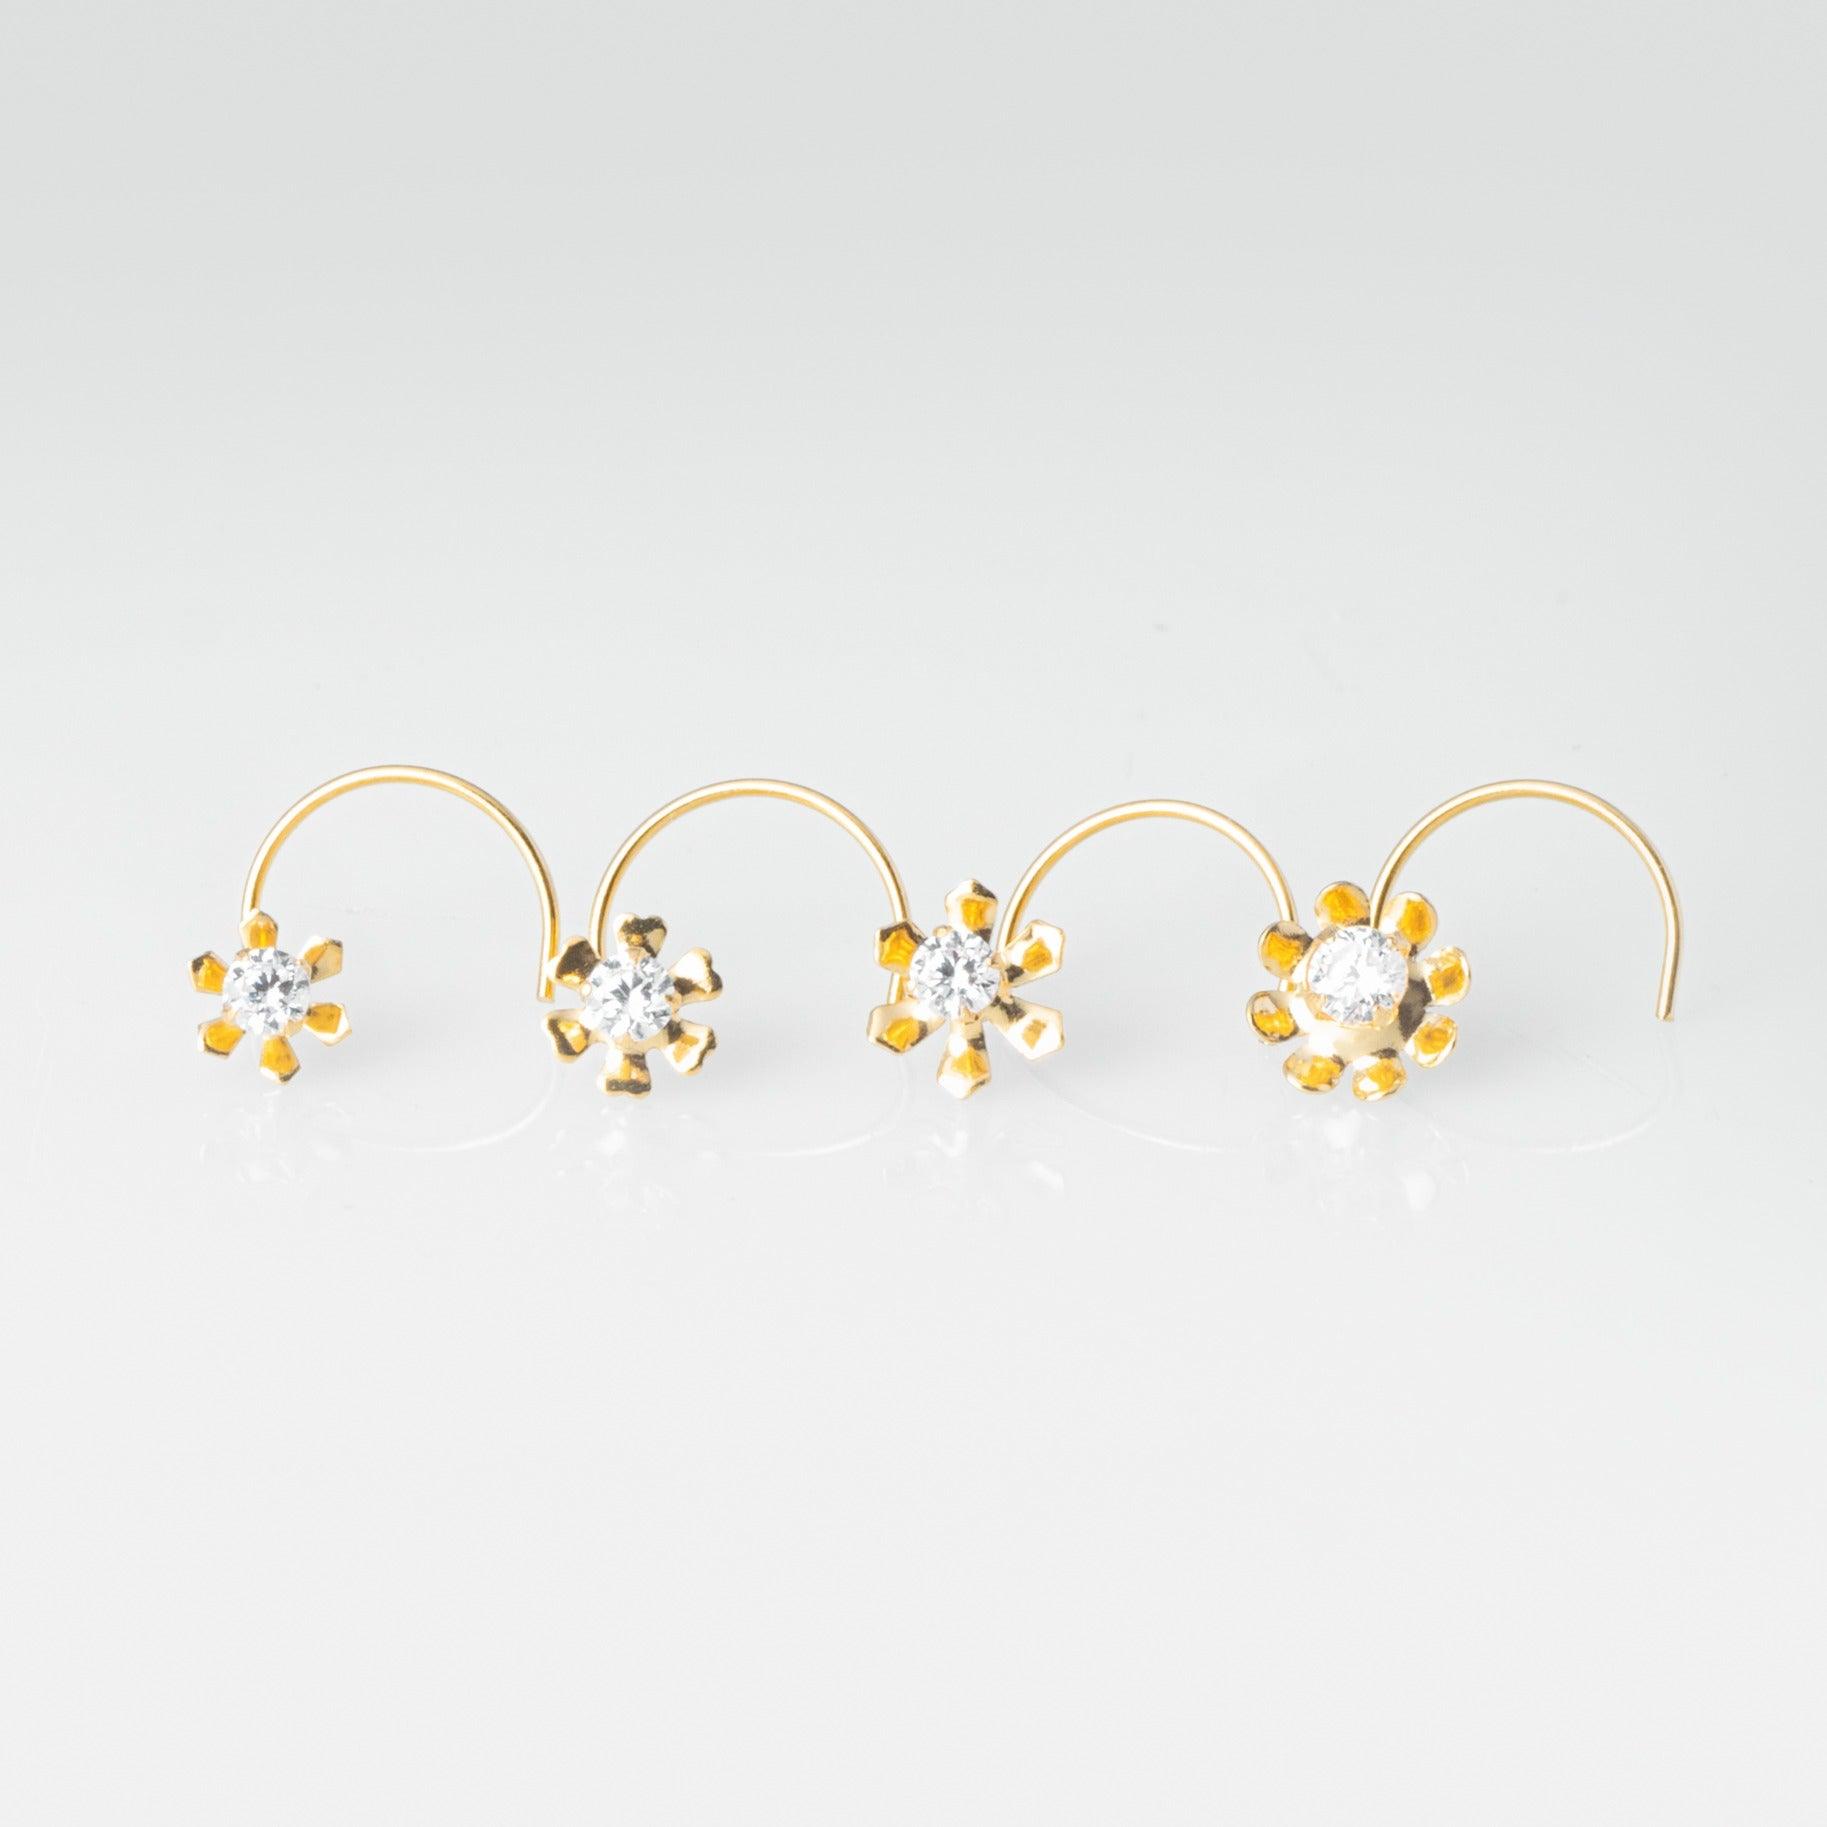 18ct Yellow Gold Wire Coil Back Nose Stud set with Cubic Zirconia in a Flower Design (4.5mm - 6mm) NIP-4-080 - Minar Jewellers